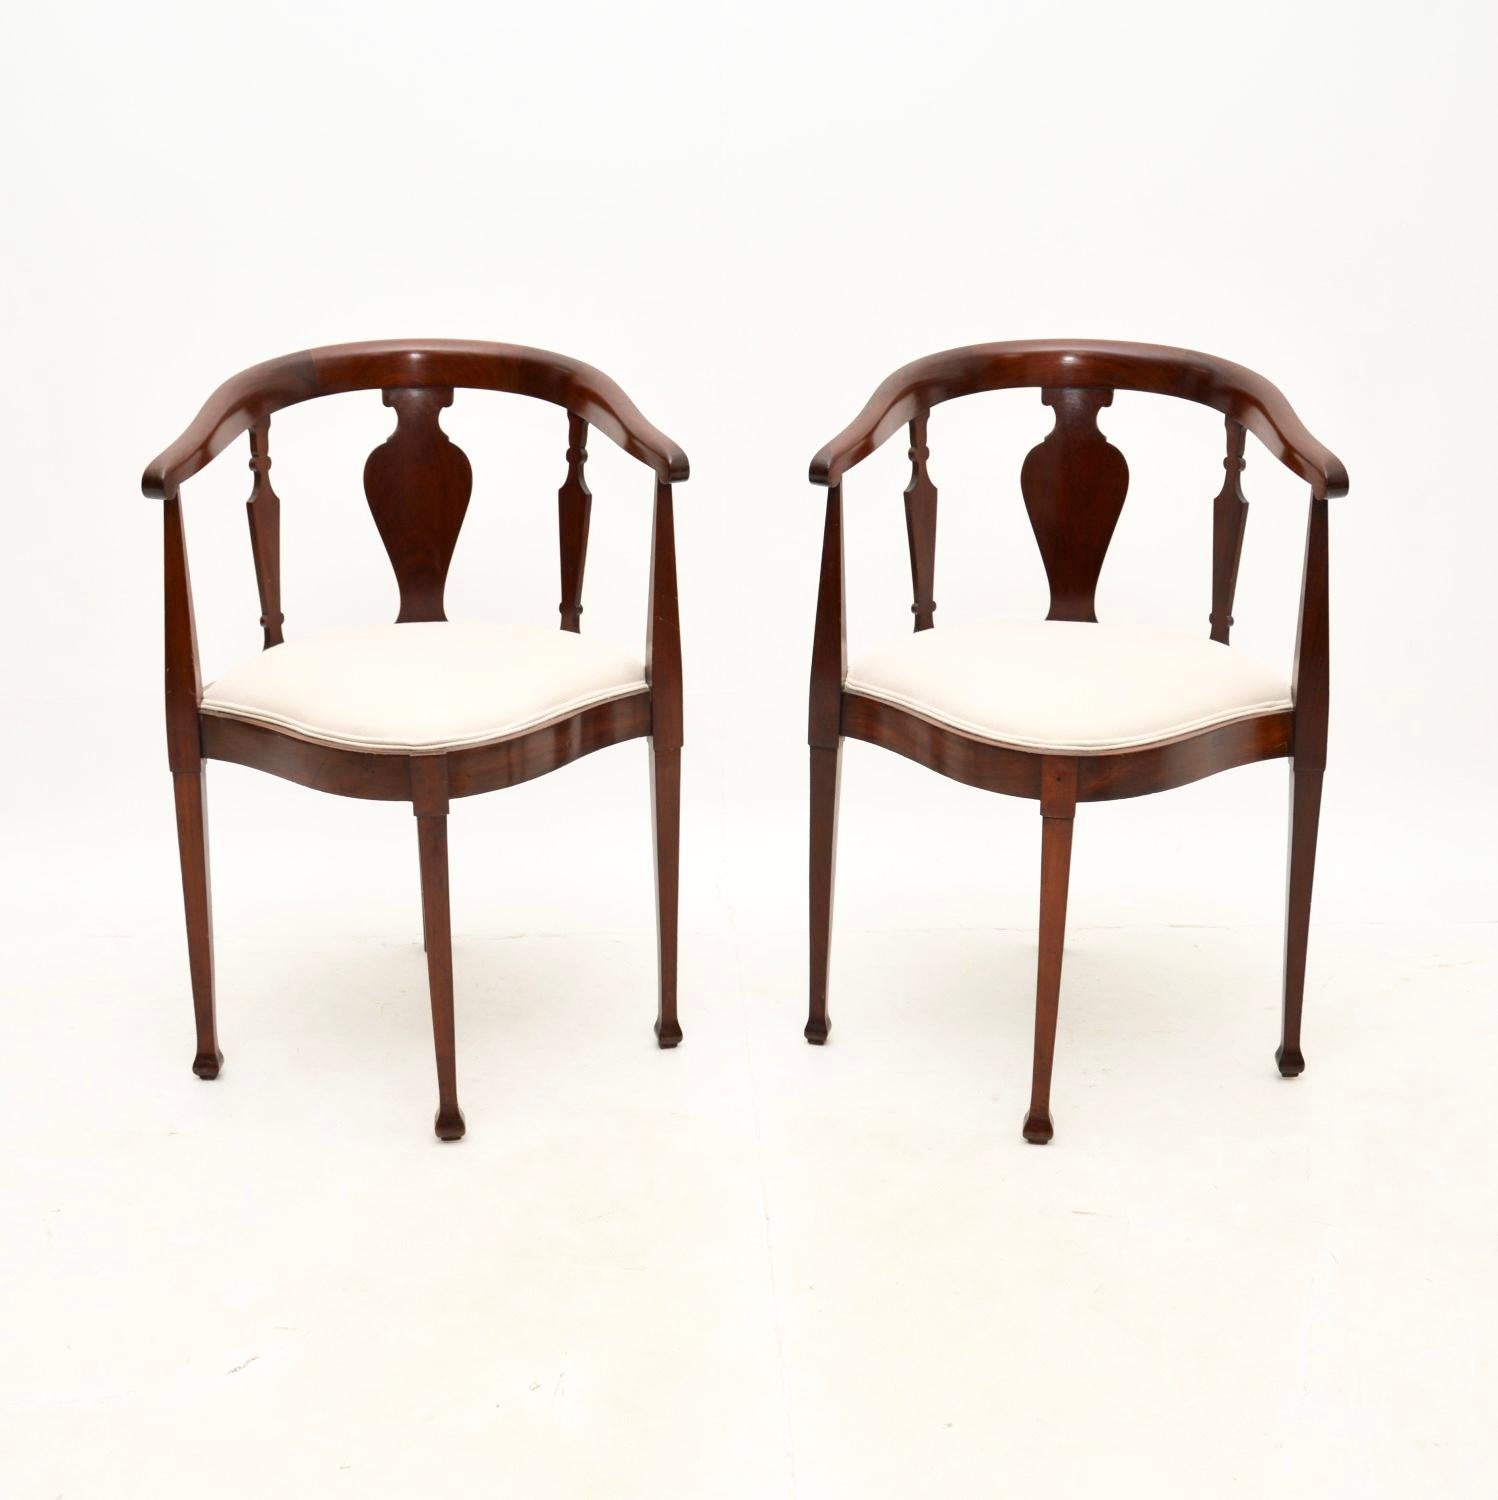 British Pair of Antique Edwardian Corner Chairs For Sale